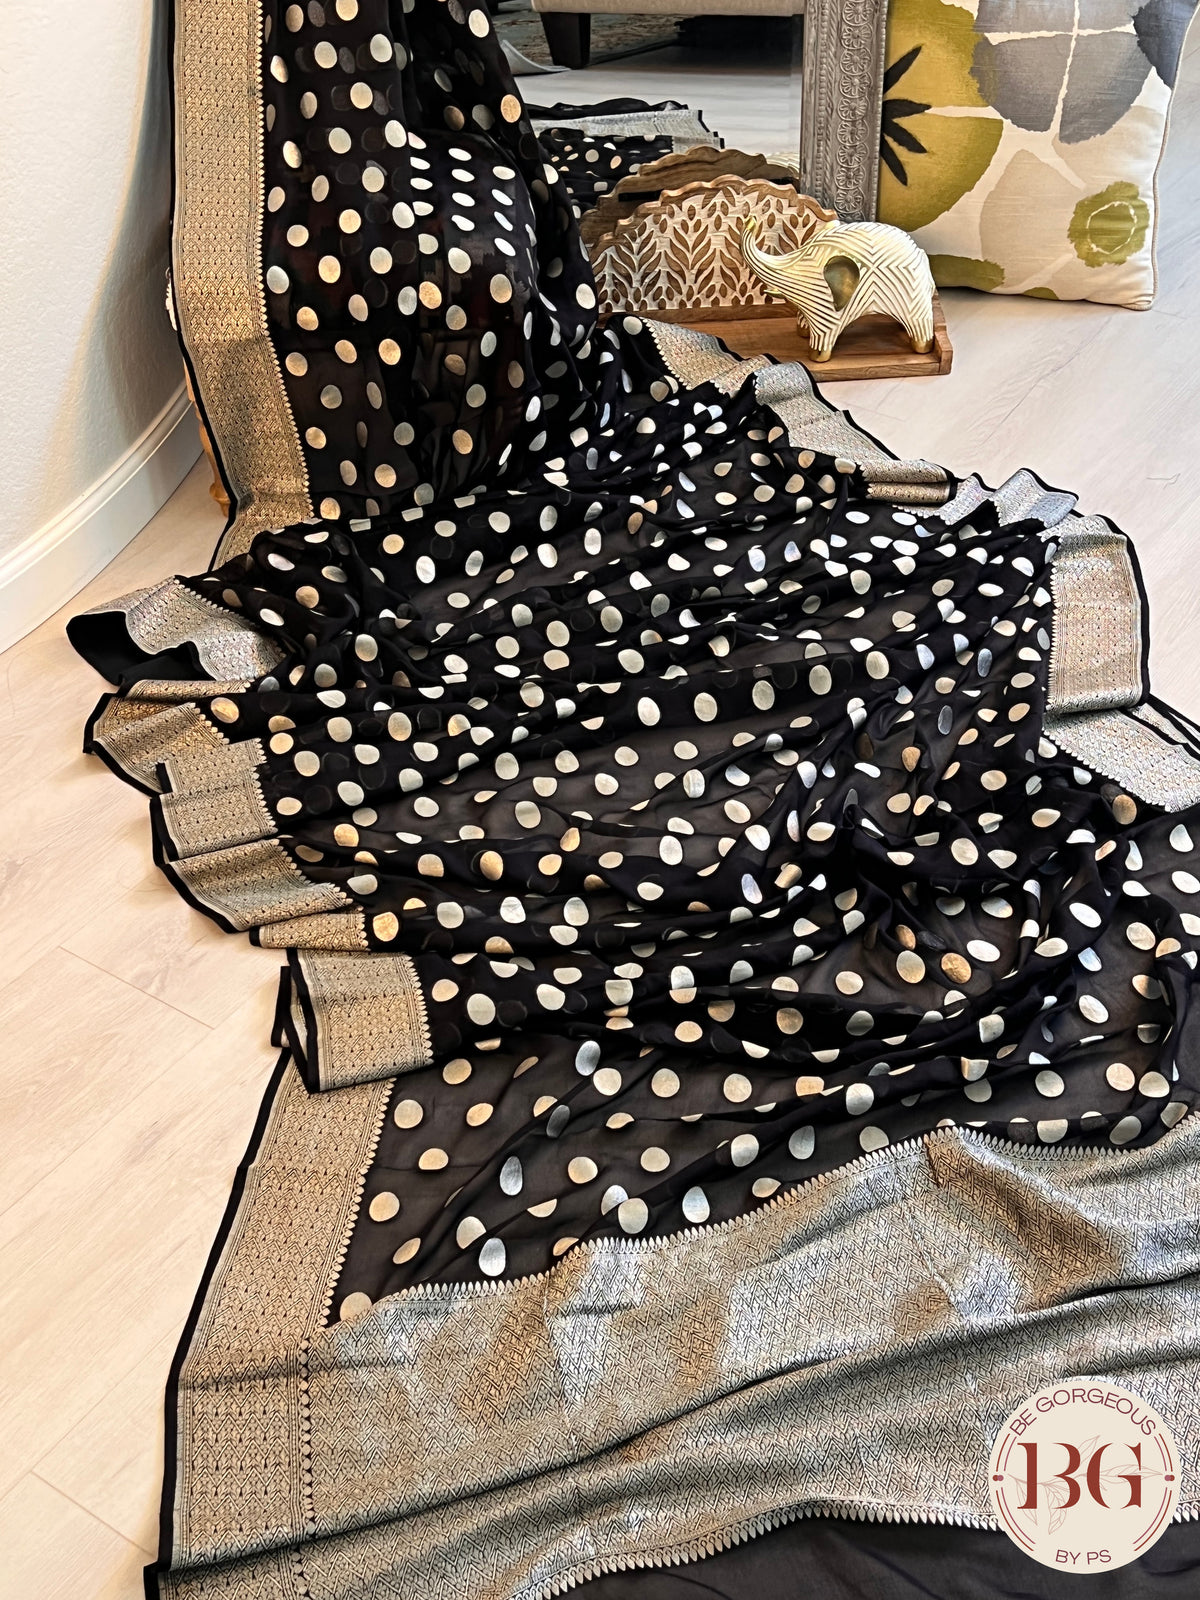 Banarasi Handwoven Georgette silk with gold zari weaved saree, polka dots and stitched blouse black